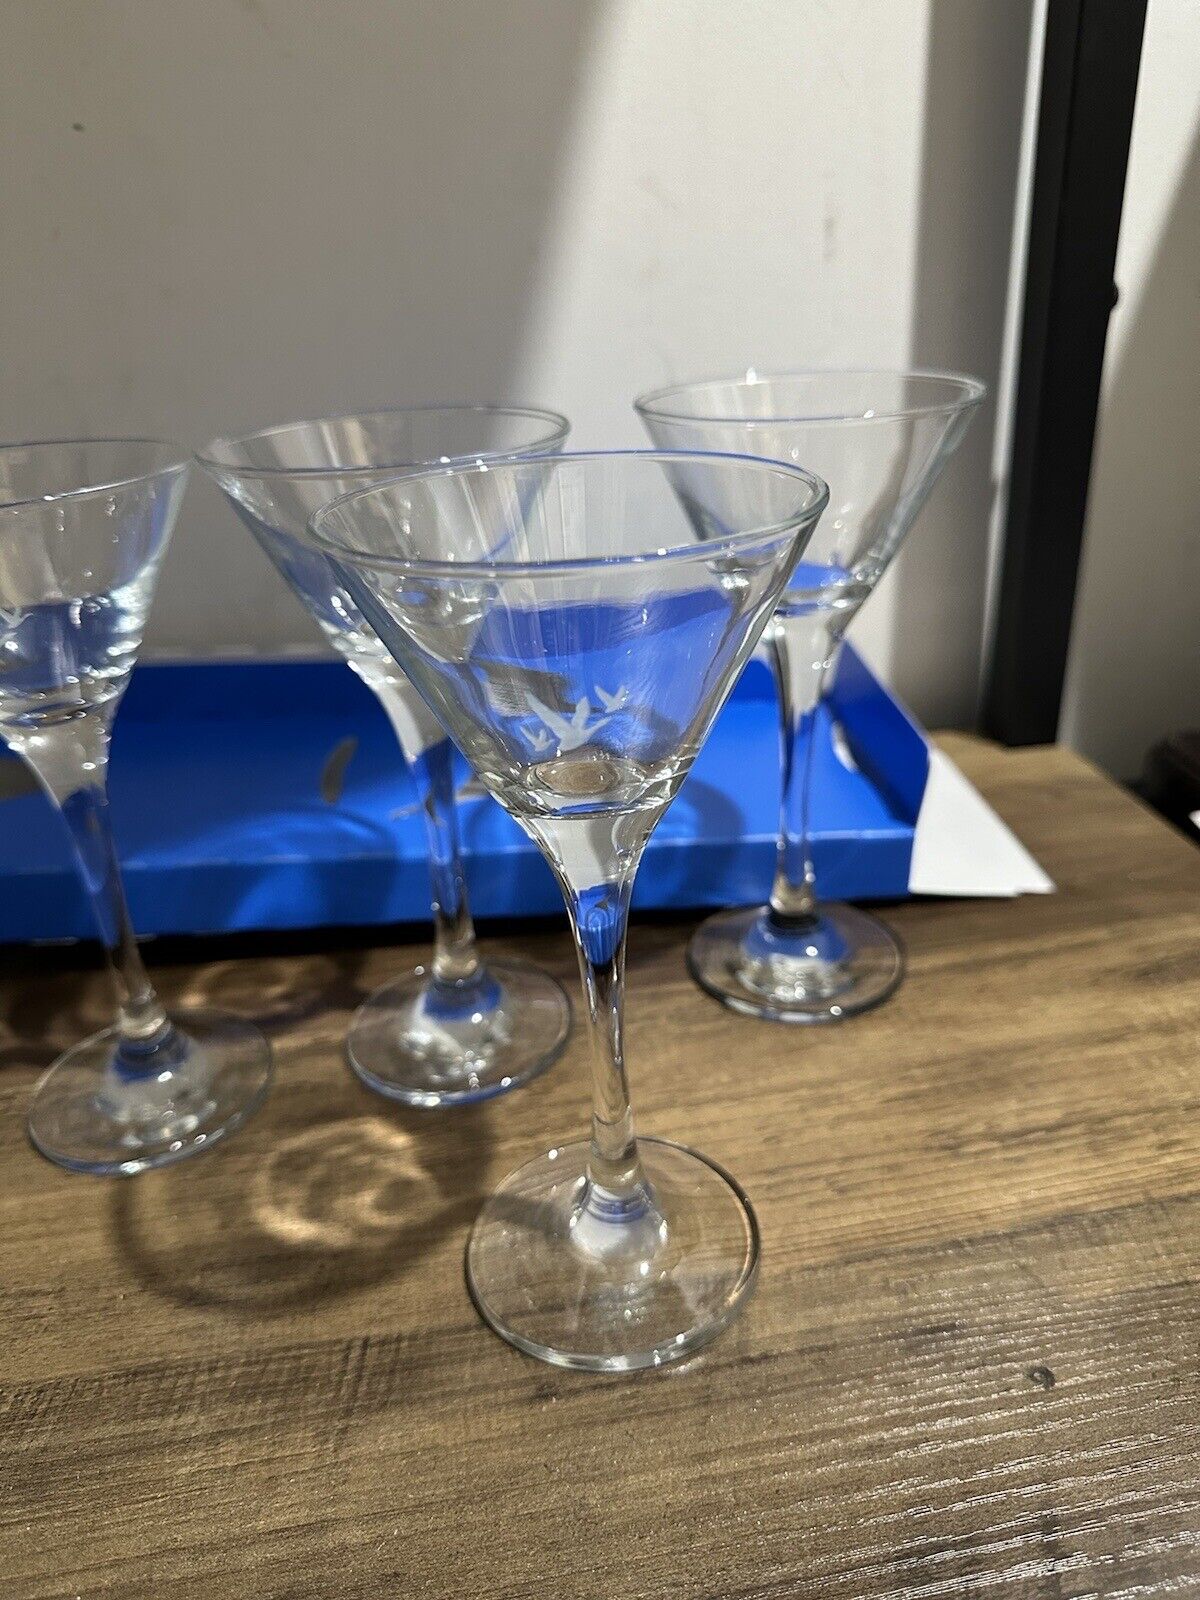 New 2023 Limited Edition Grey Goose Crystal Martini Glasses Set of 2 Glasses